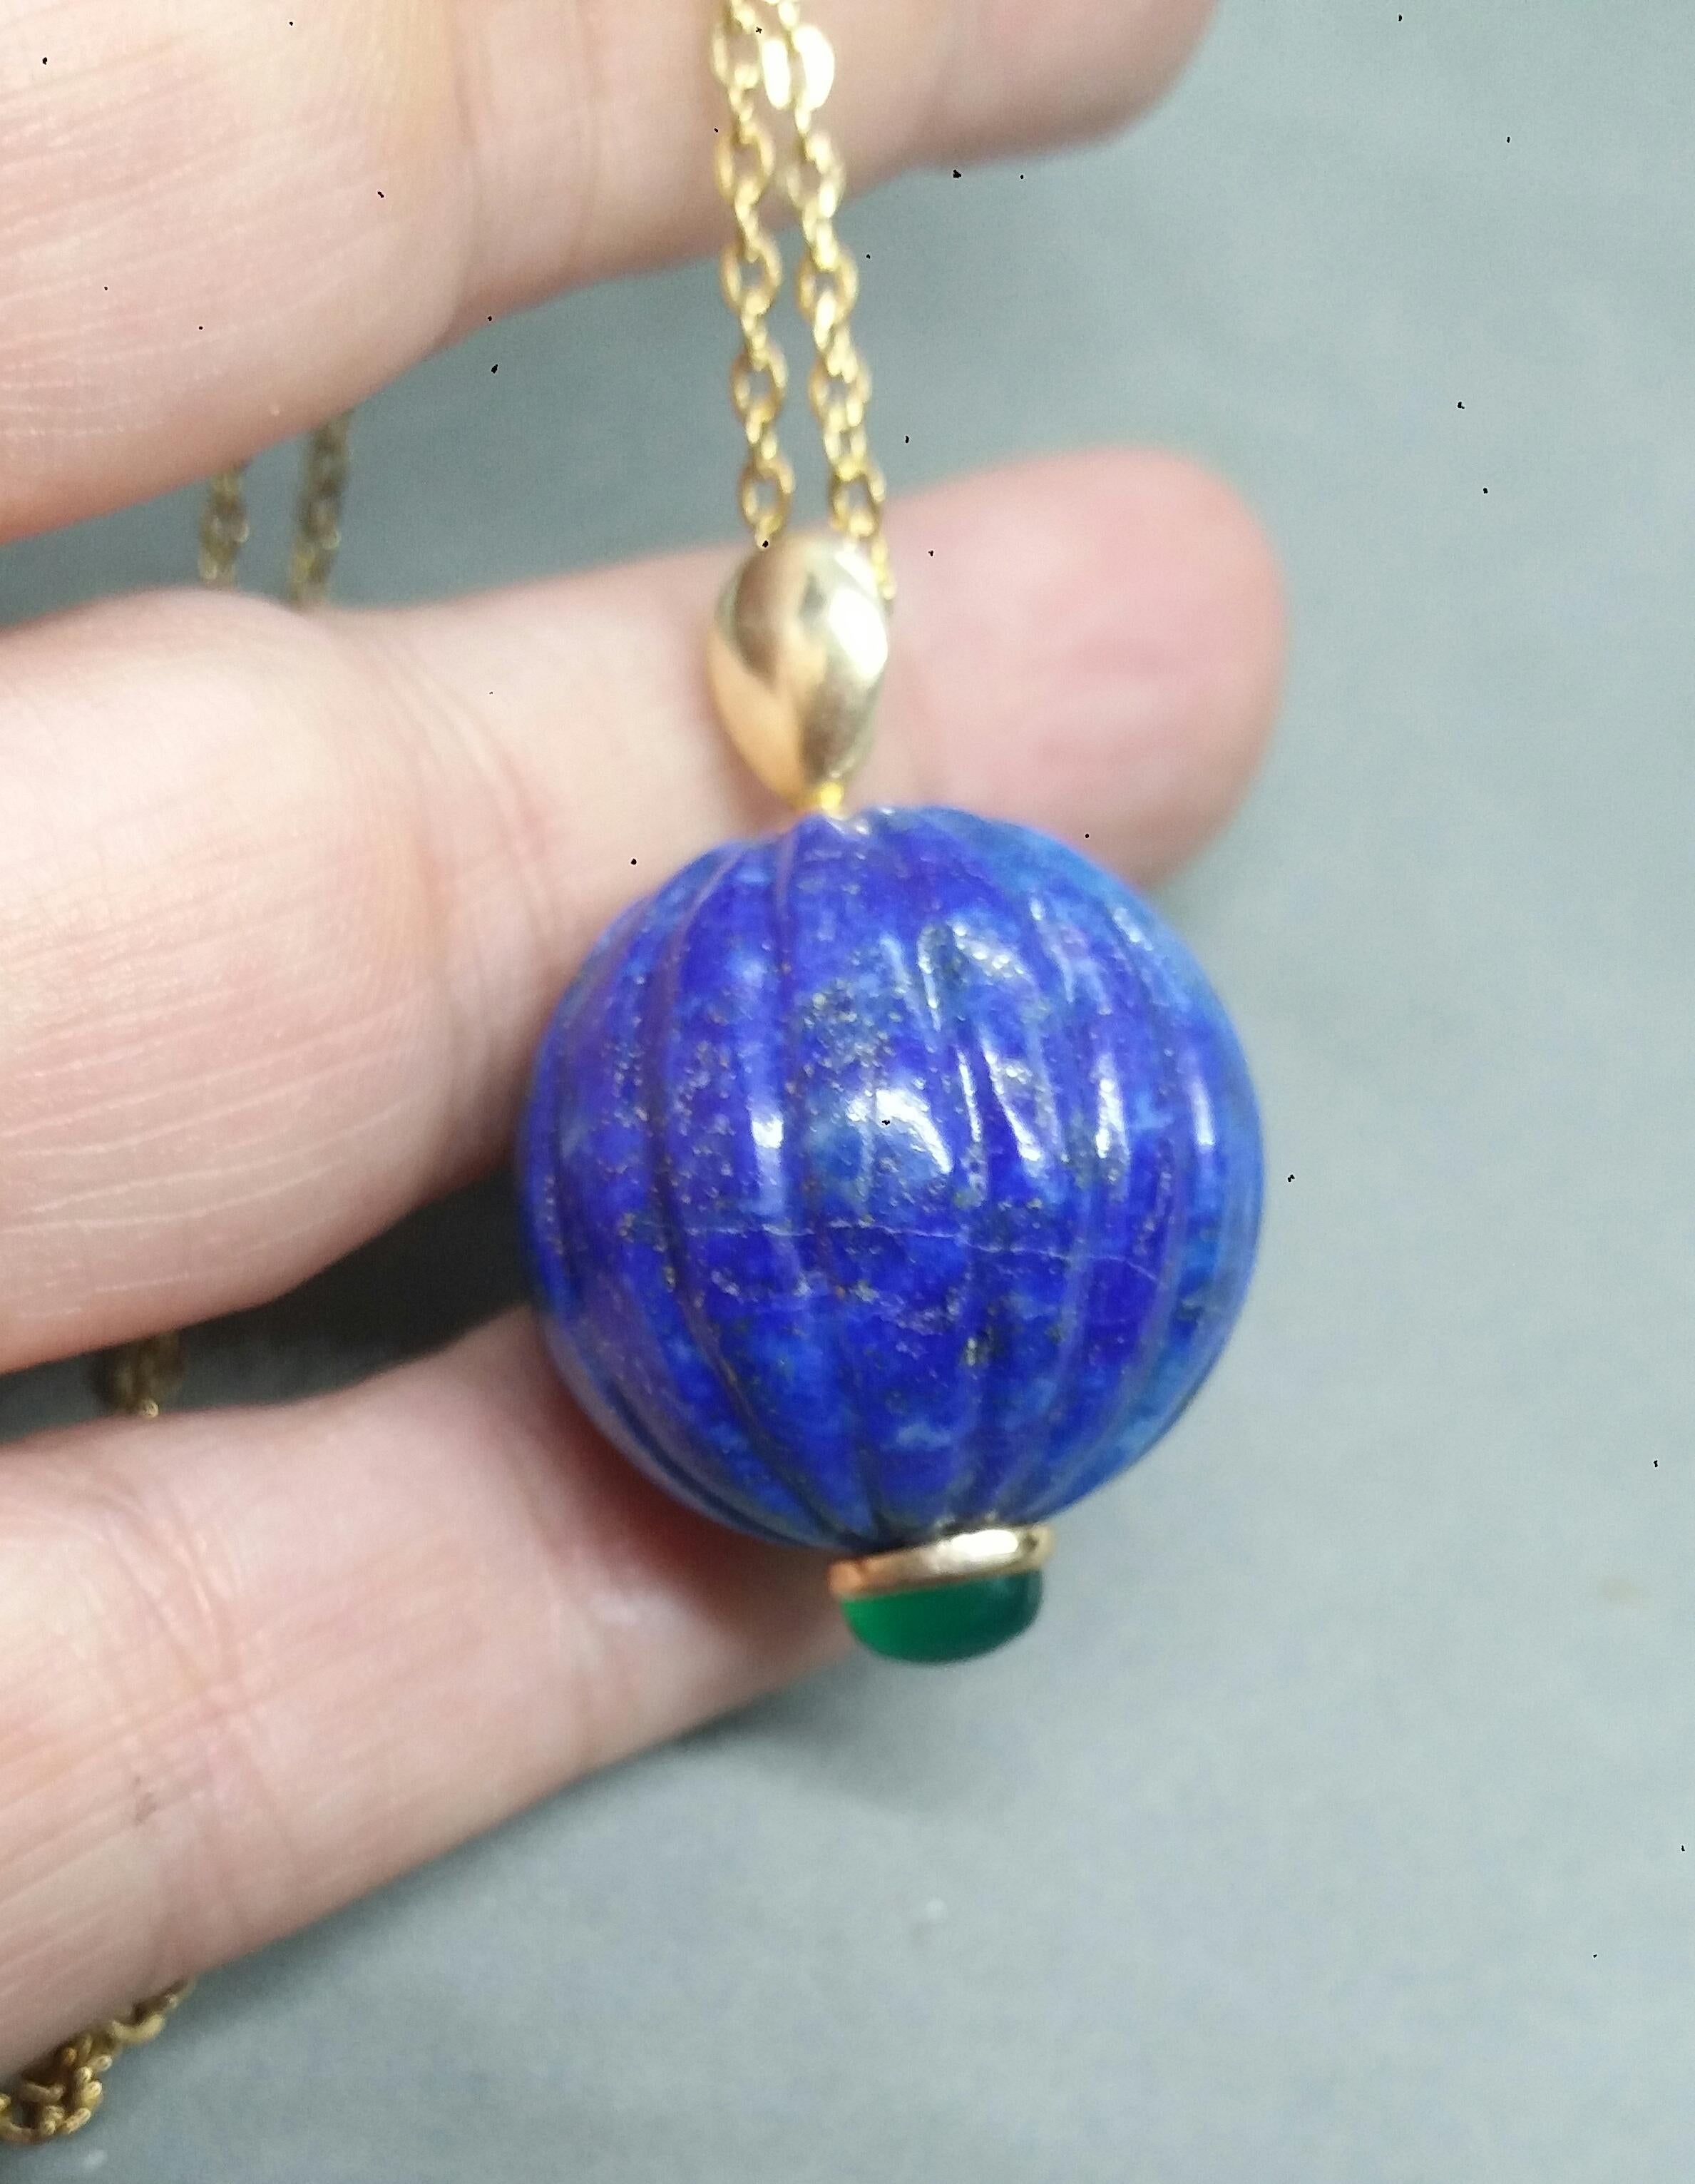 A unique pendant made of an Engraved Genuine Lapis Lazuli Round Bead 25 mm in diameter,set with an oval Green Onyx Cabochon measuring 6x8 mm. and a yellow gold pendant bail on the top part.

In 1978 our workshop started in Italy to make simple-chic